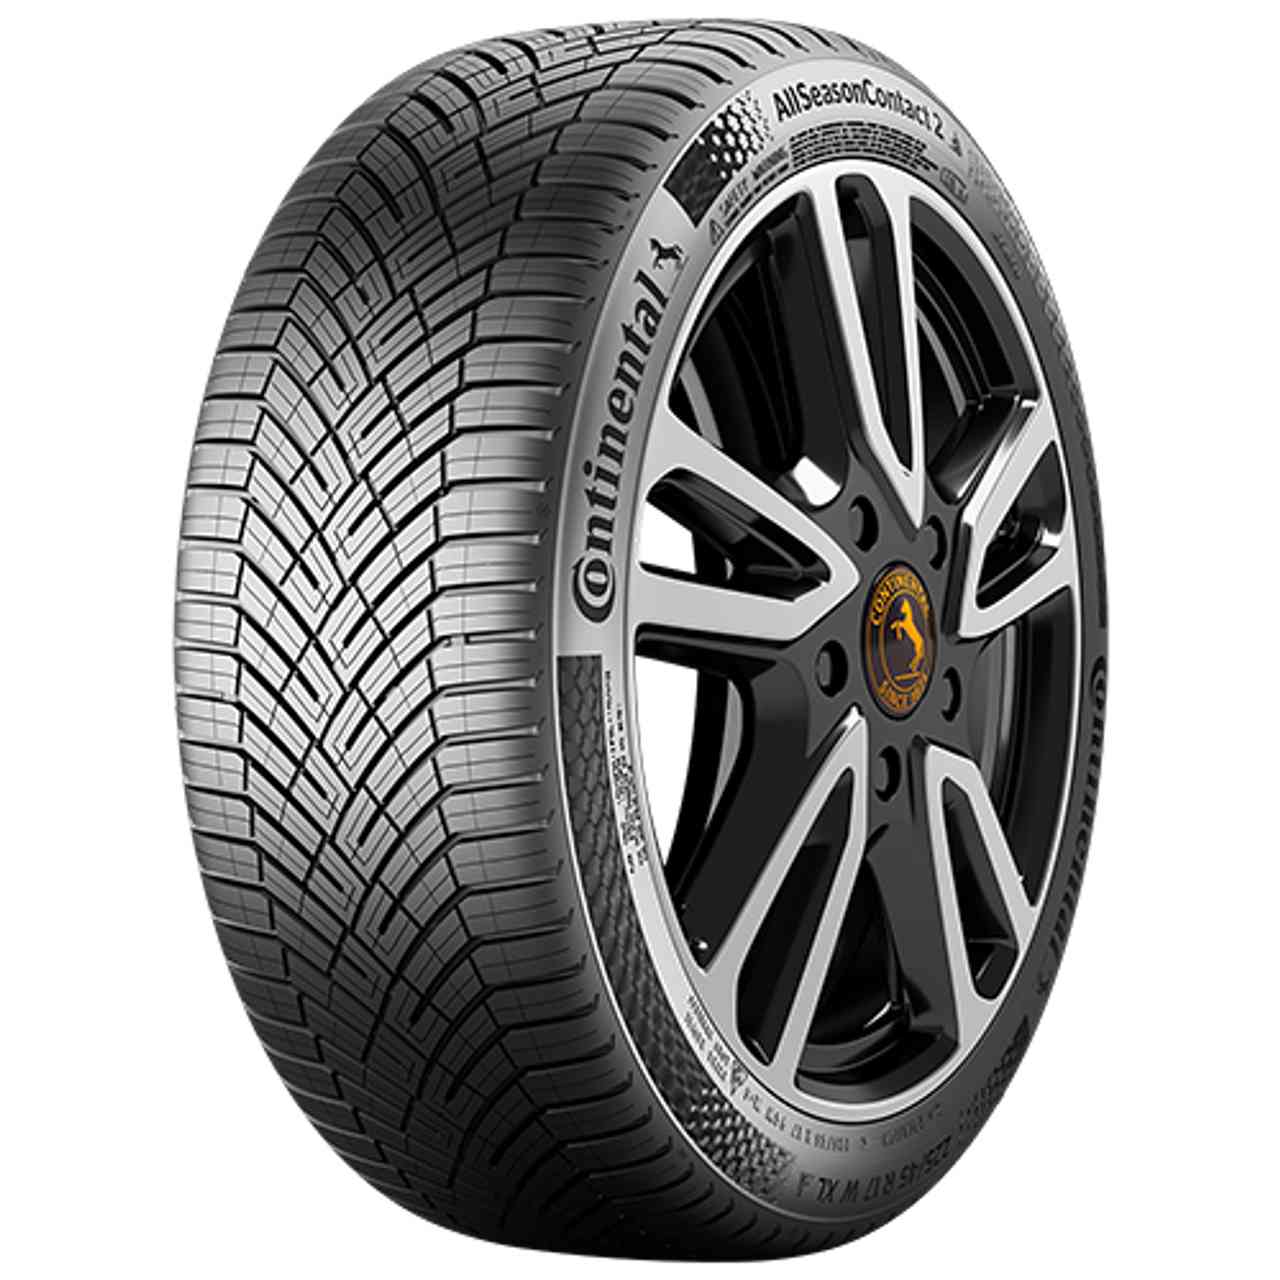 CONTINENTAL ALLSEASONCONTACT 2 (EVc) 235/55R19 105V BSW